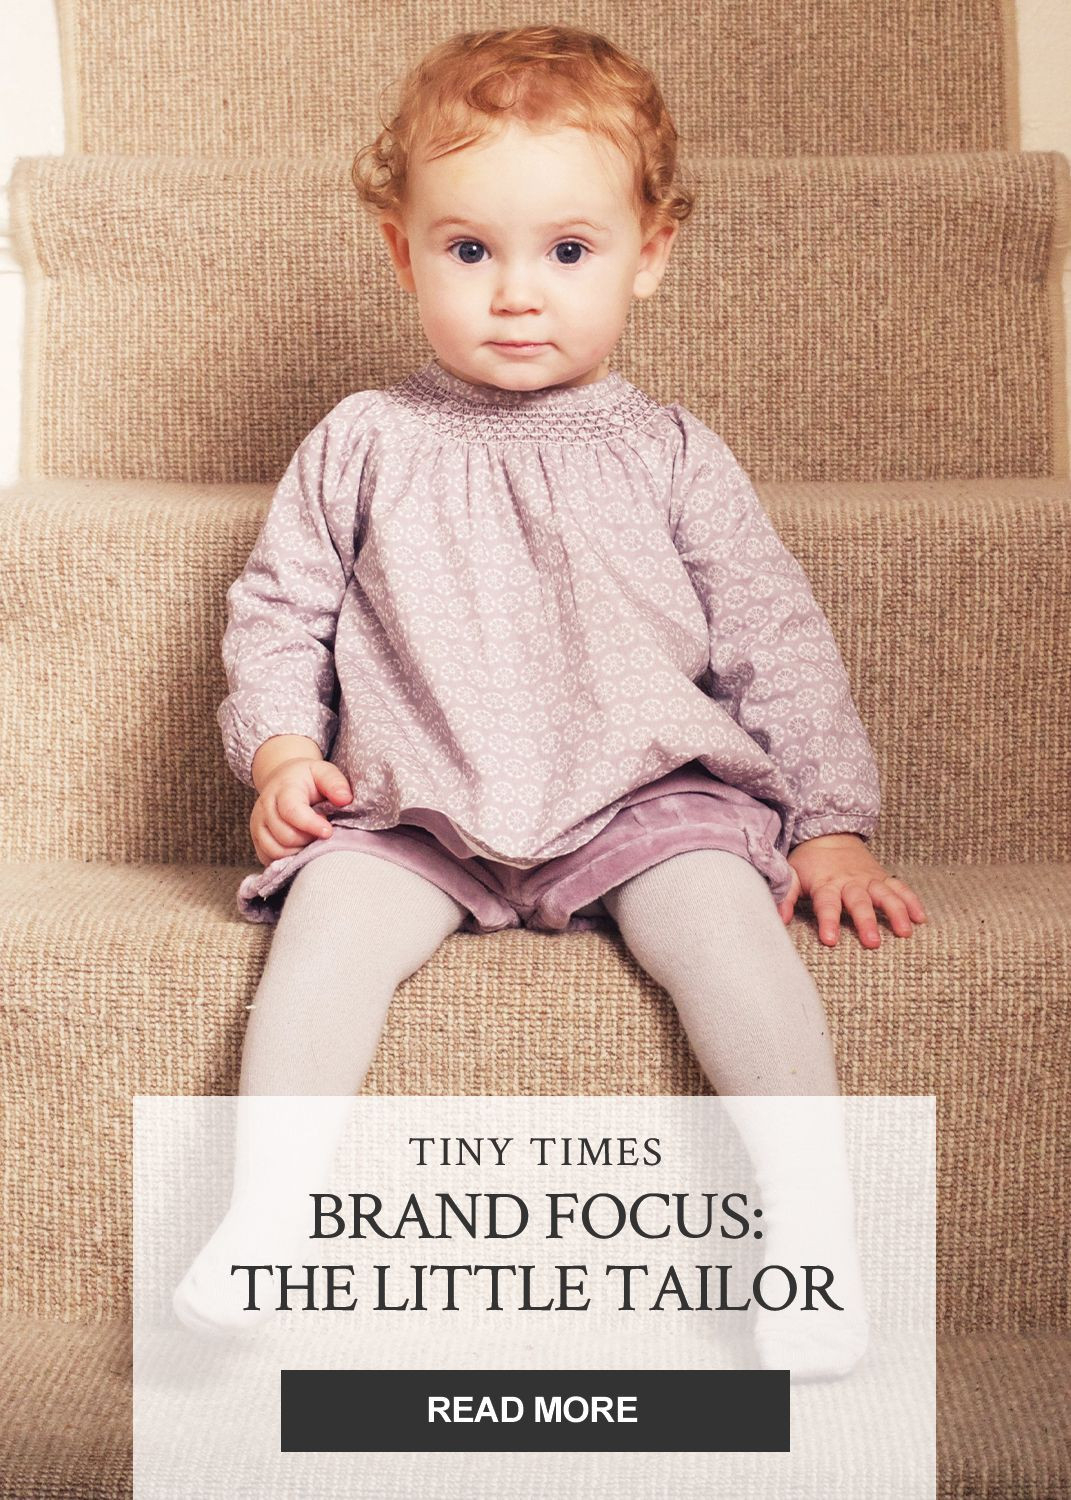 Baby Fashion Tailor
 Brand Focus The Little Tailor With images